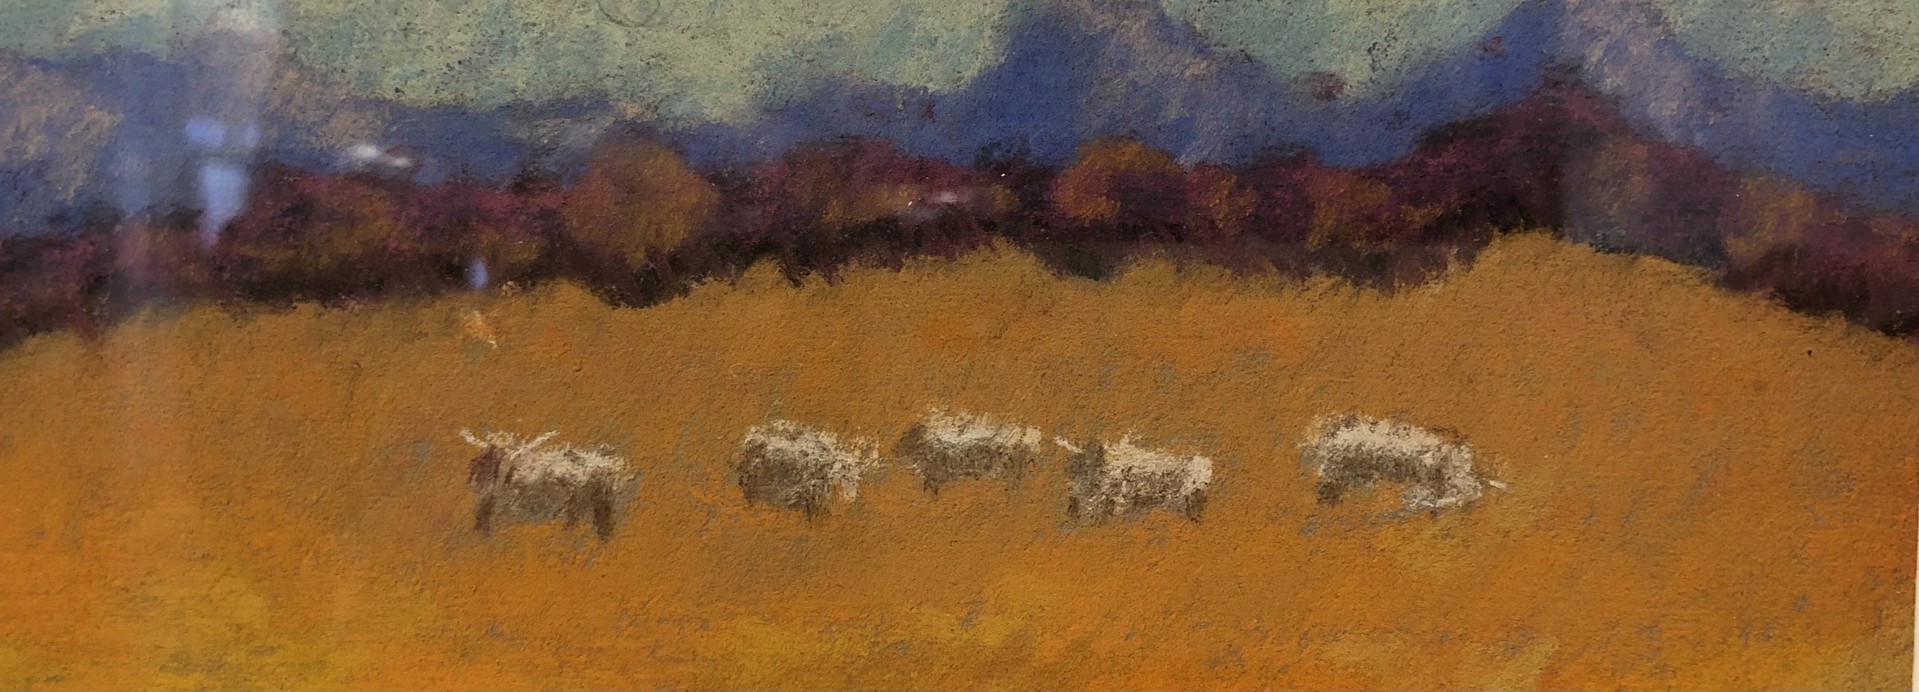 SMALL HERD, RED HILLS by James Pohl